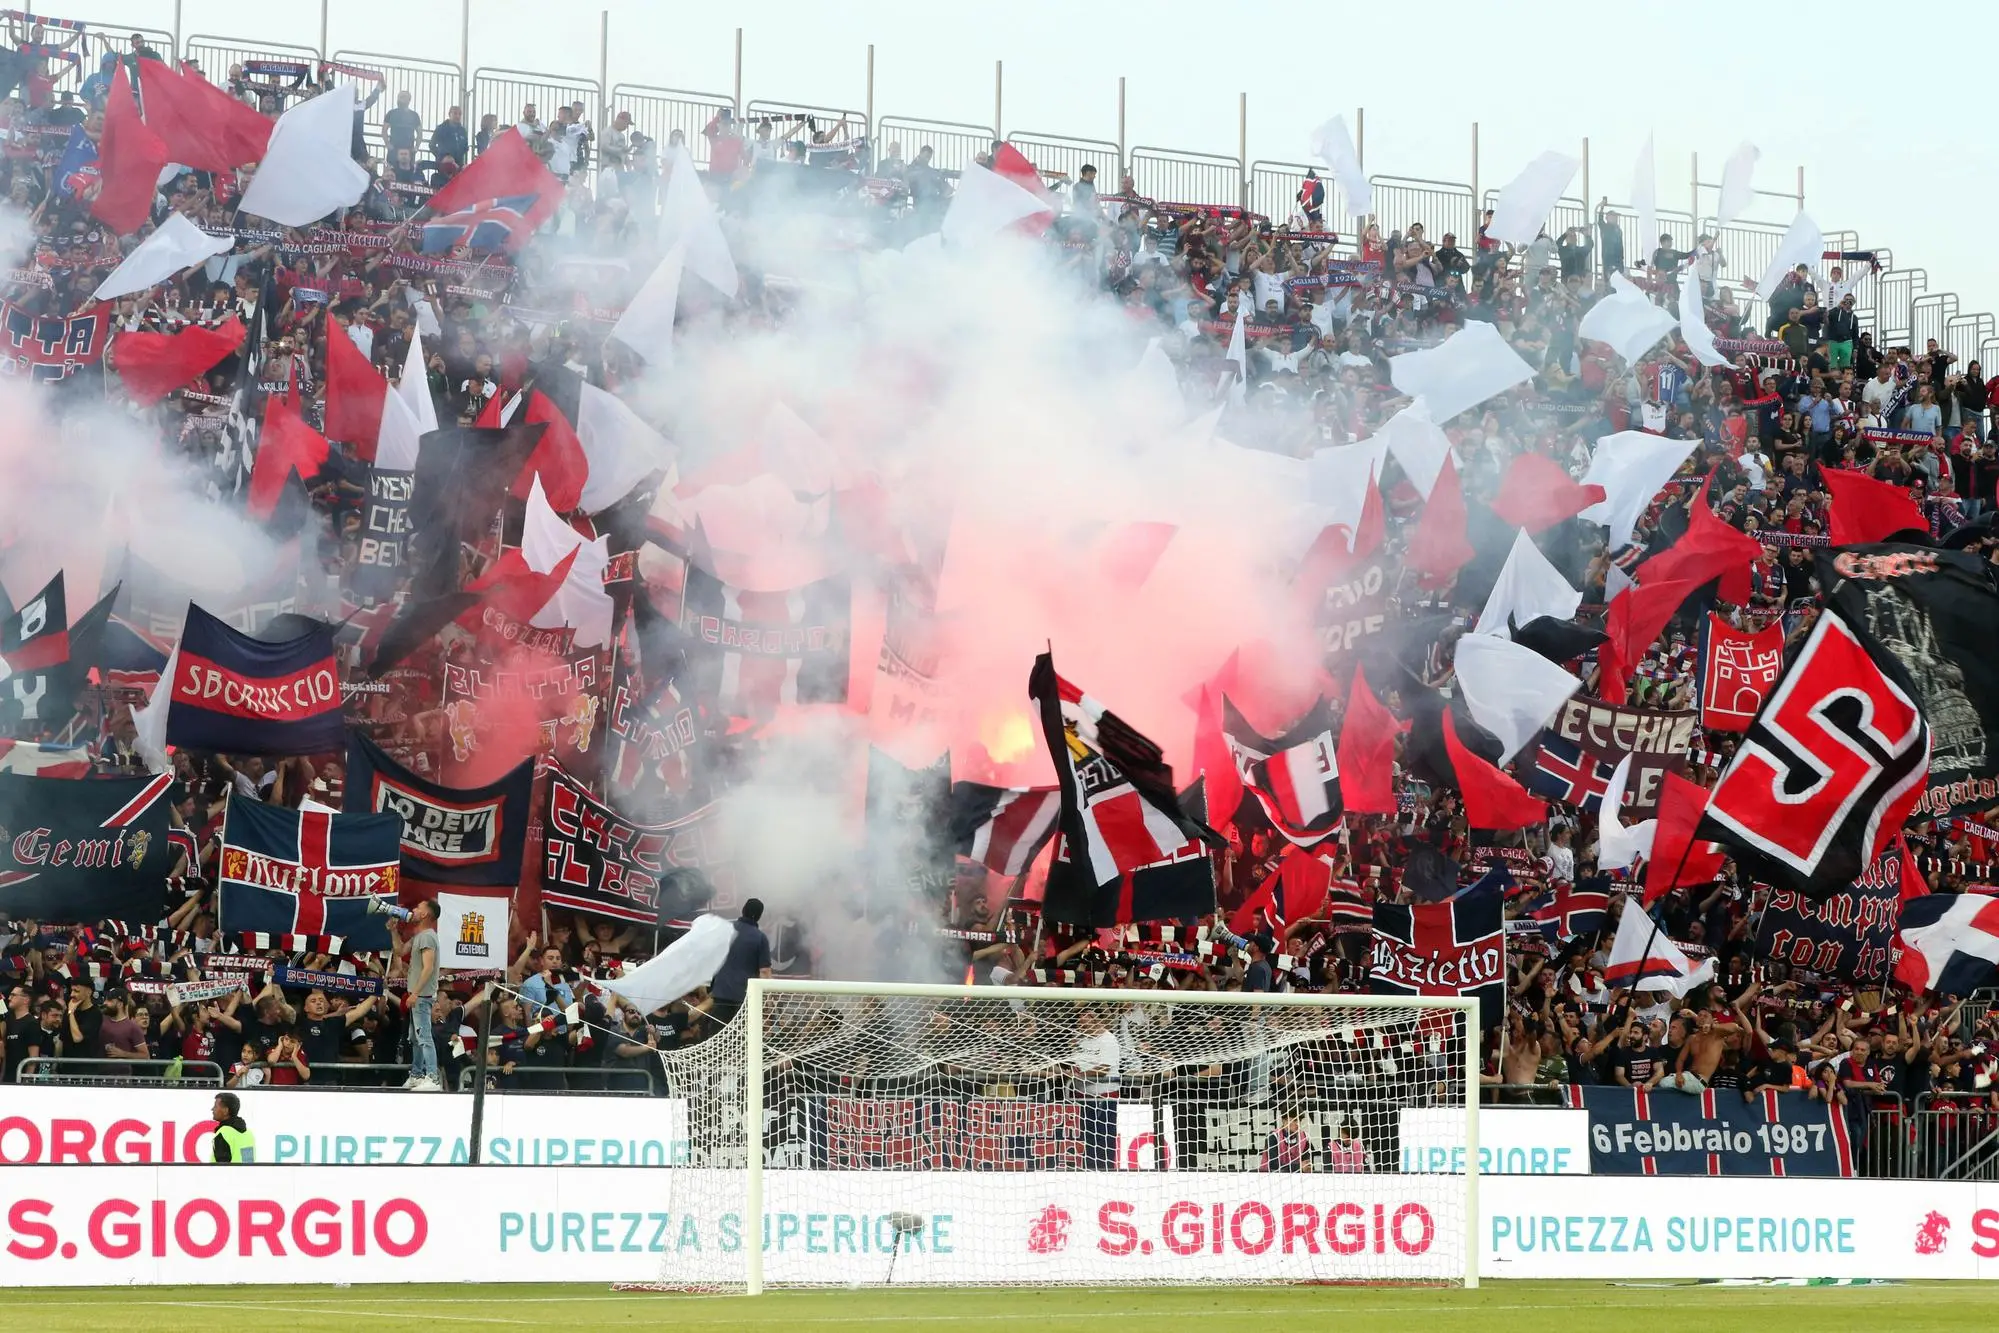 The Curva nord of the Unipol Domus, a regular meeting place for organized Cagliari fans